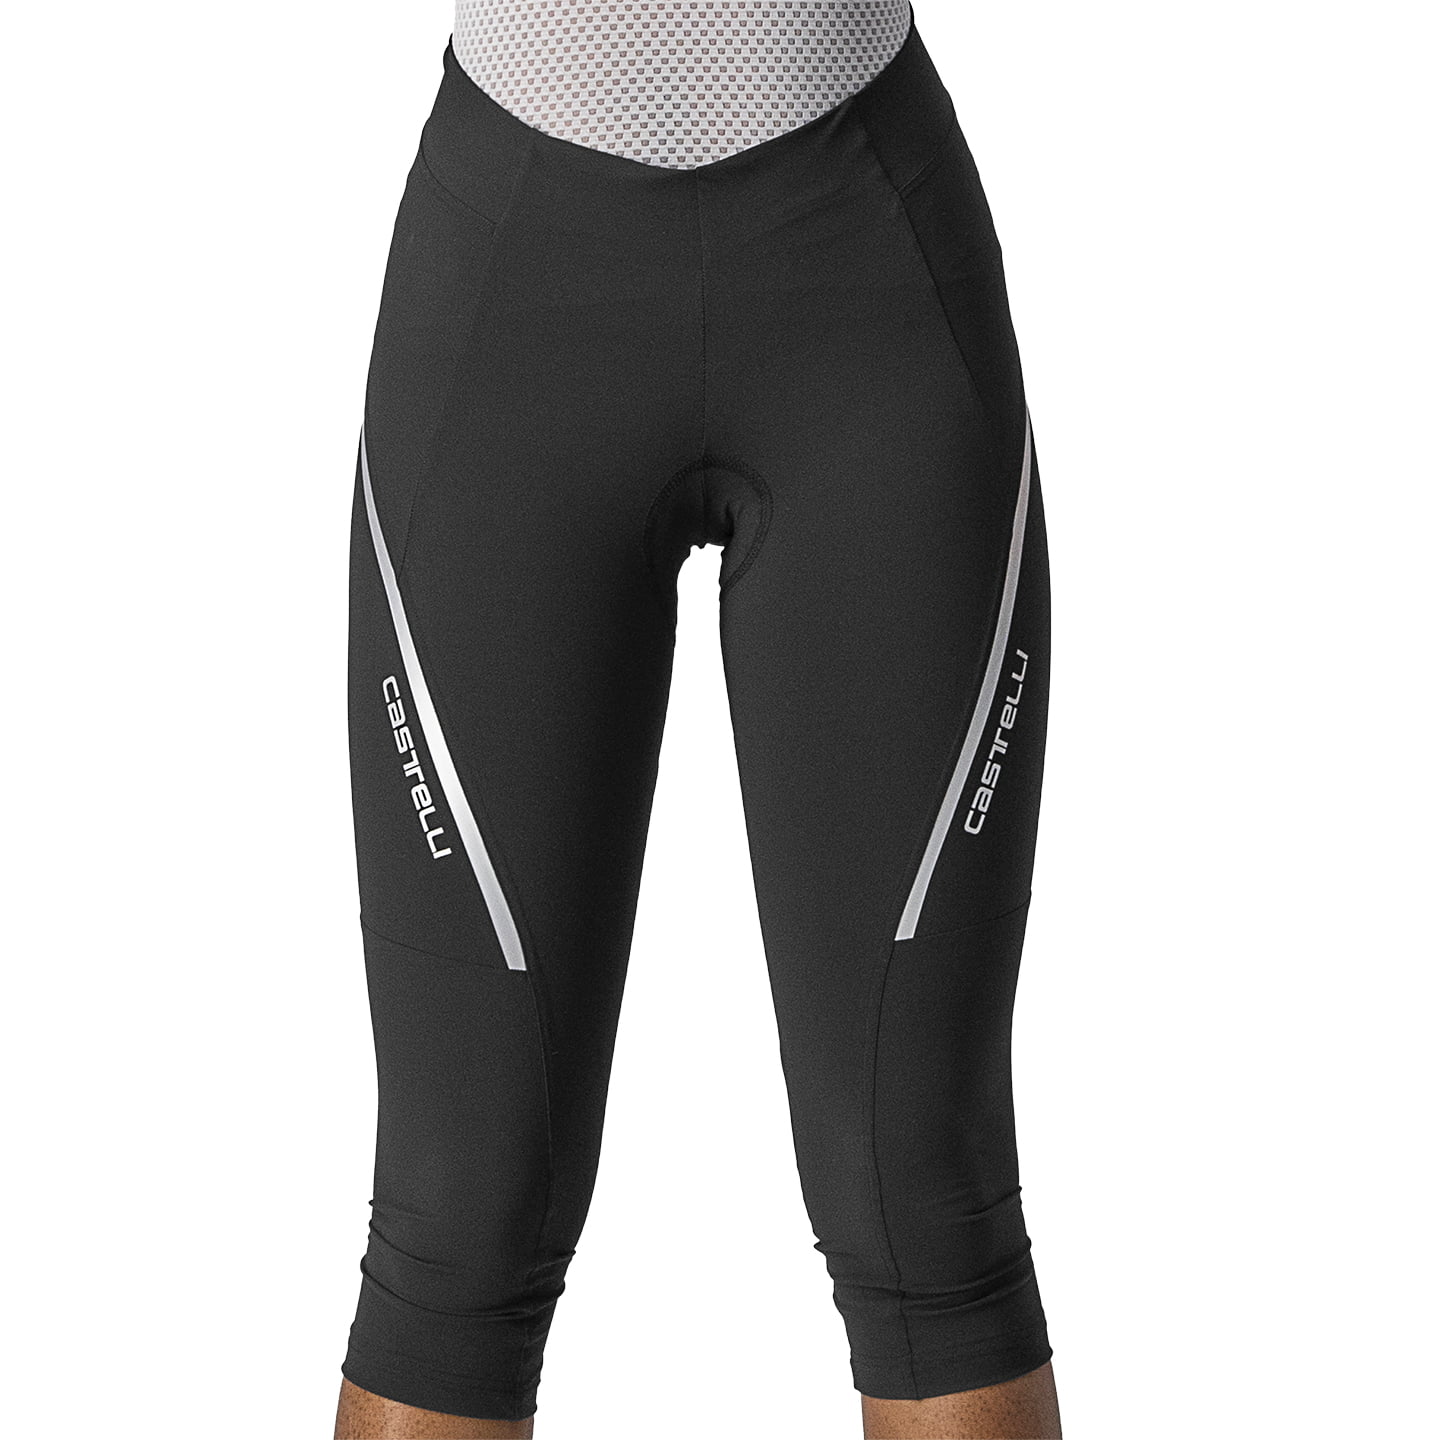 Velocissima 3 Women’s Knickers Women’s Knickers, size S, Cycle trousers, Cycle clothing